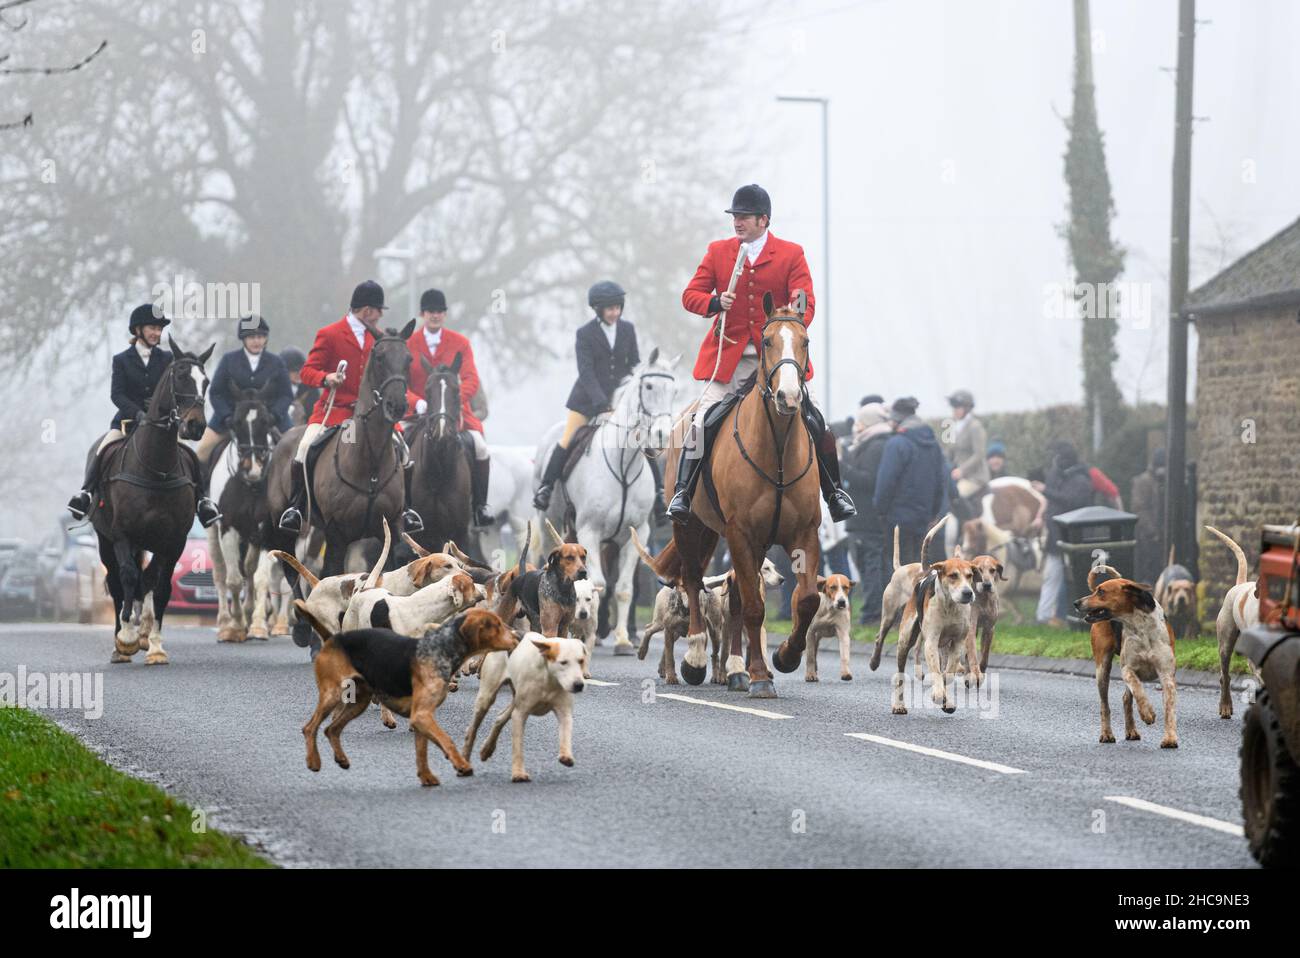 Huntsman Chris Edwards leads The Cottesmore Hunt Boxing Day Meet at Barleythorpe, Sunday 26 December 2021 © 2021 Nico Morgan. All Rights Reserved Stock Photo